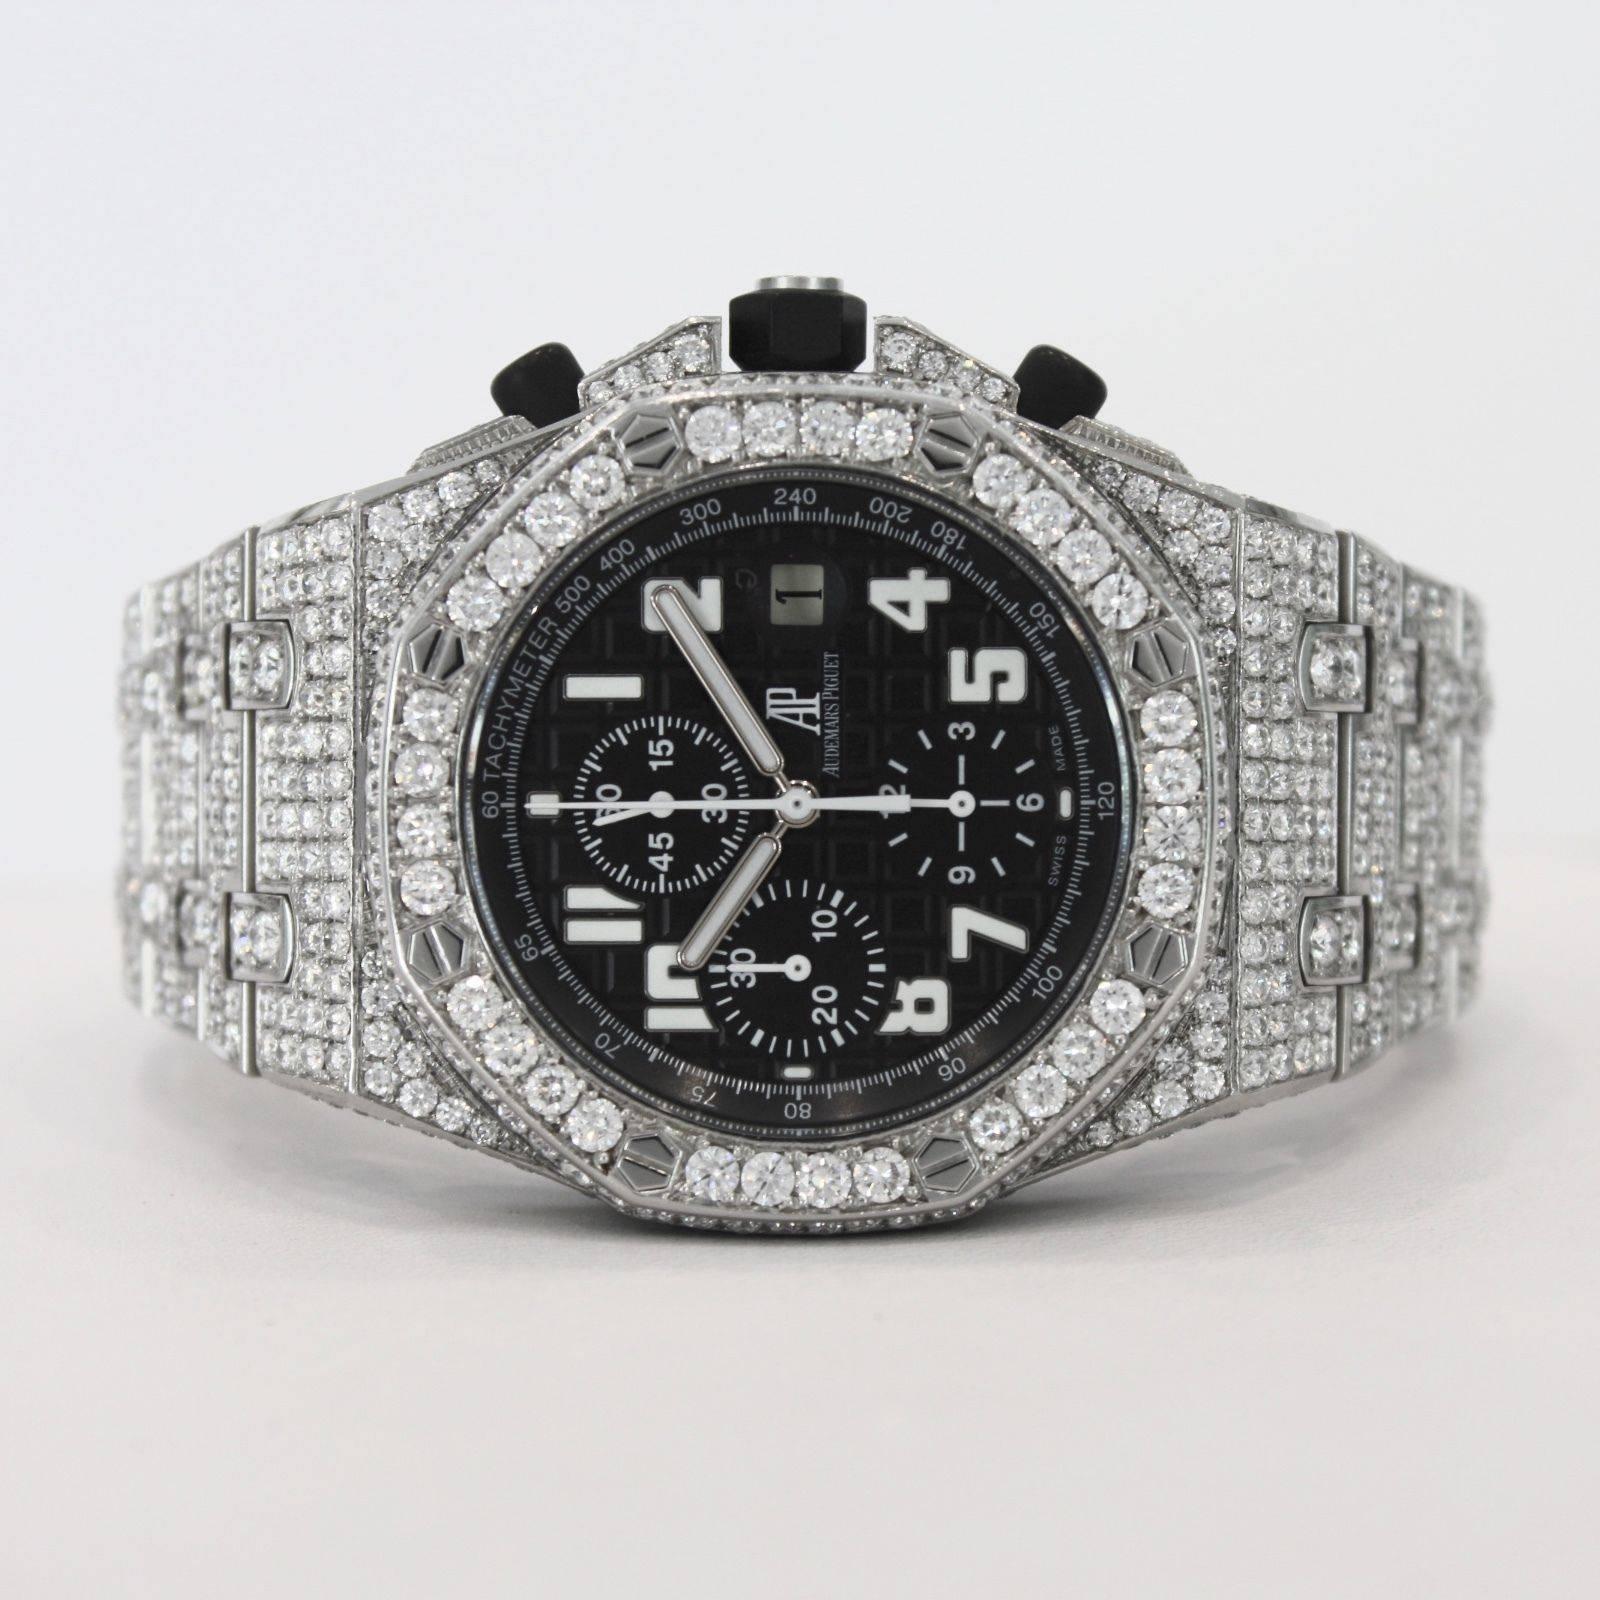 Brand Name: Audemars Piguet
Style Number: 25721ST.OO.1000ST.08.A
Also Called: 25721STOO1000ST08A
Series: Royal Oak Offshore Black Themes
Gender: Men's
Case Material: Stainless Steel w/ Diamonds
Dial Color	: Black
Movement: